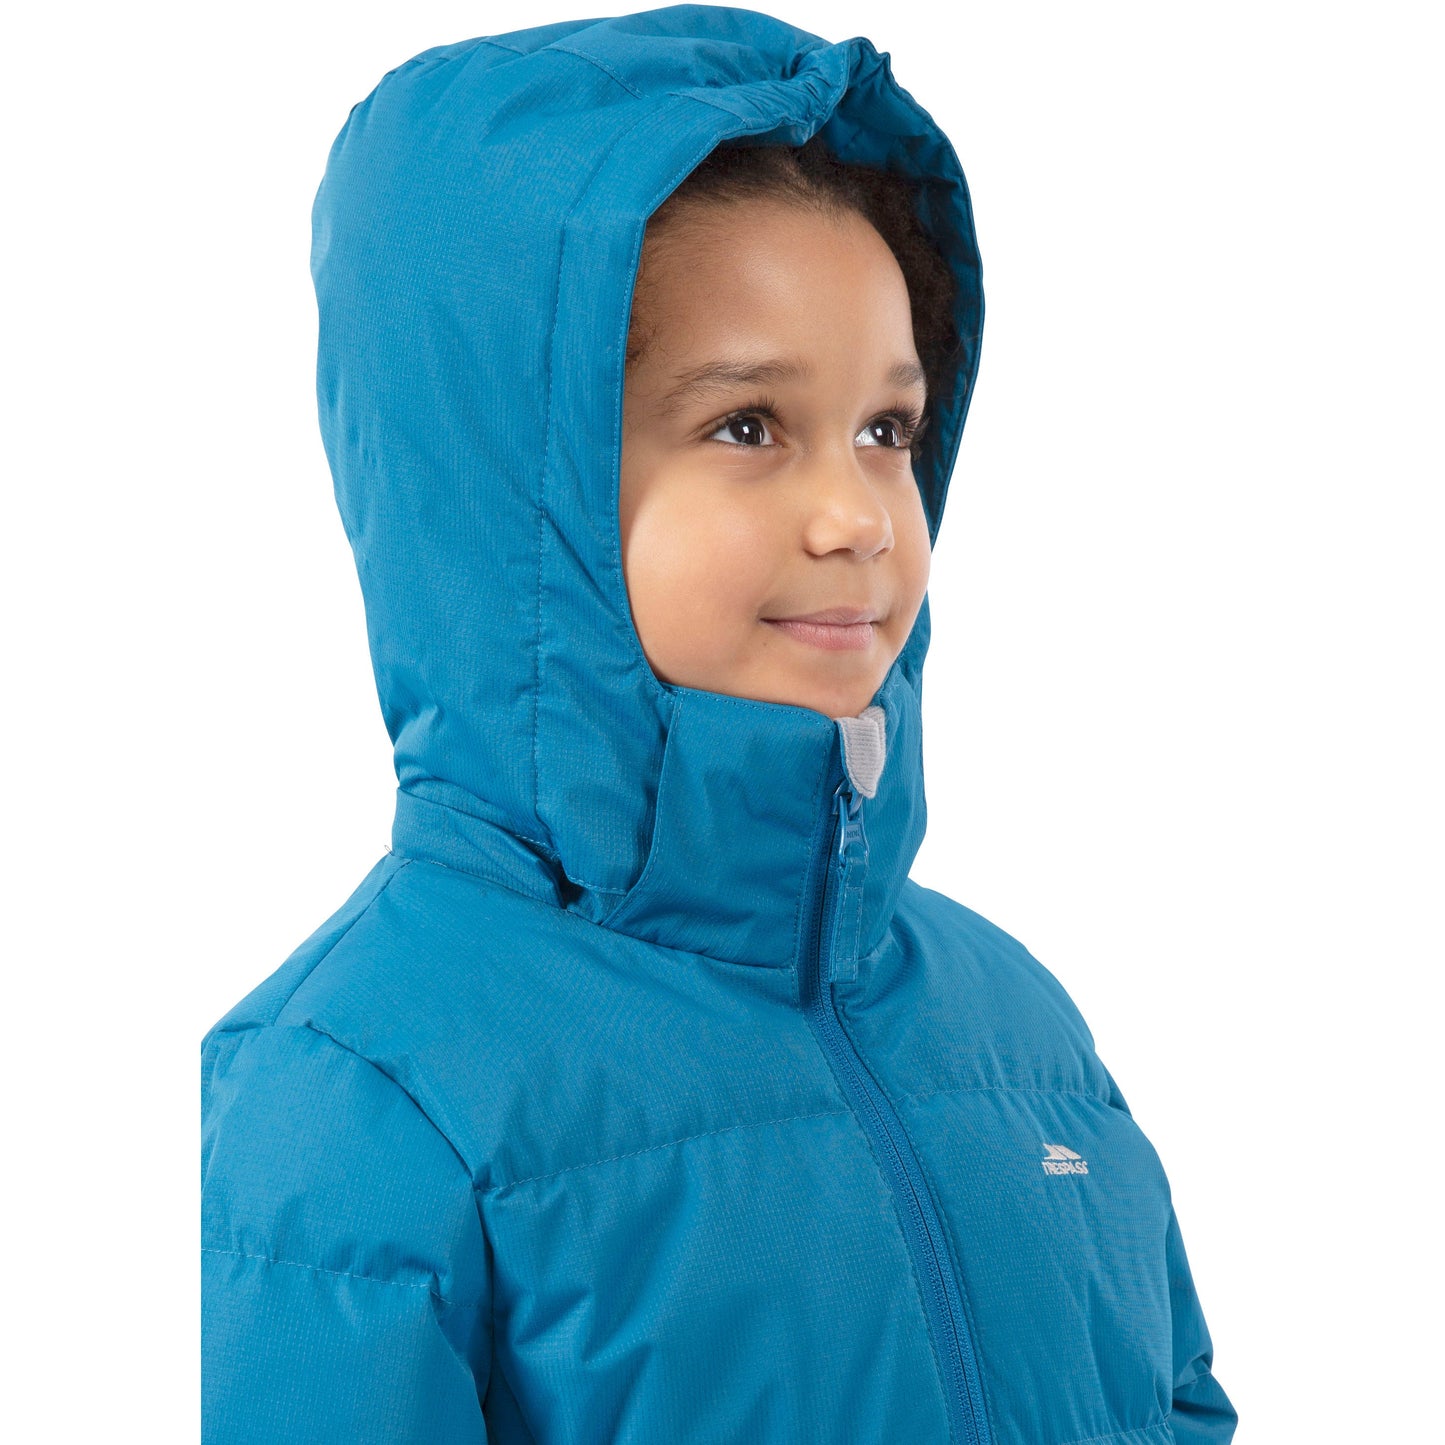 Tiffy Girls Padded Casual Jacket in Rich Teal